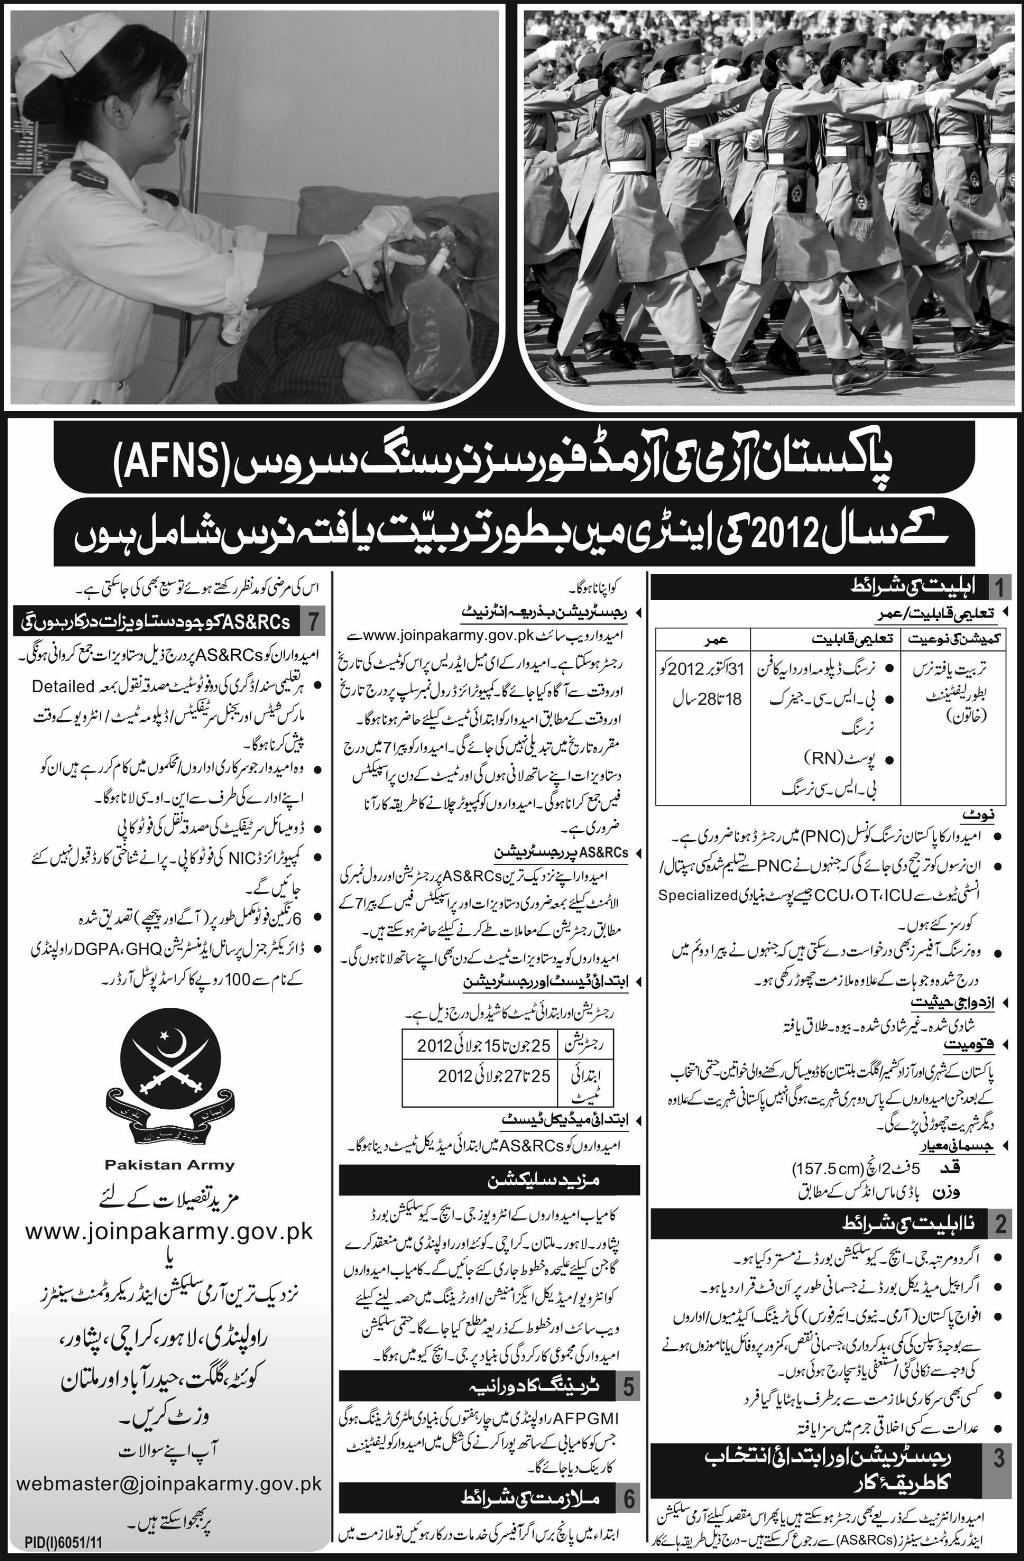 Join Pakistan Army as a Nurse Commissioned Officer in AFNS (Armed Forces Nursing Service) (Govt. job)